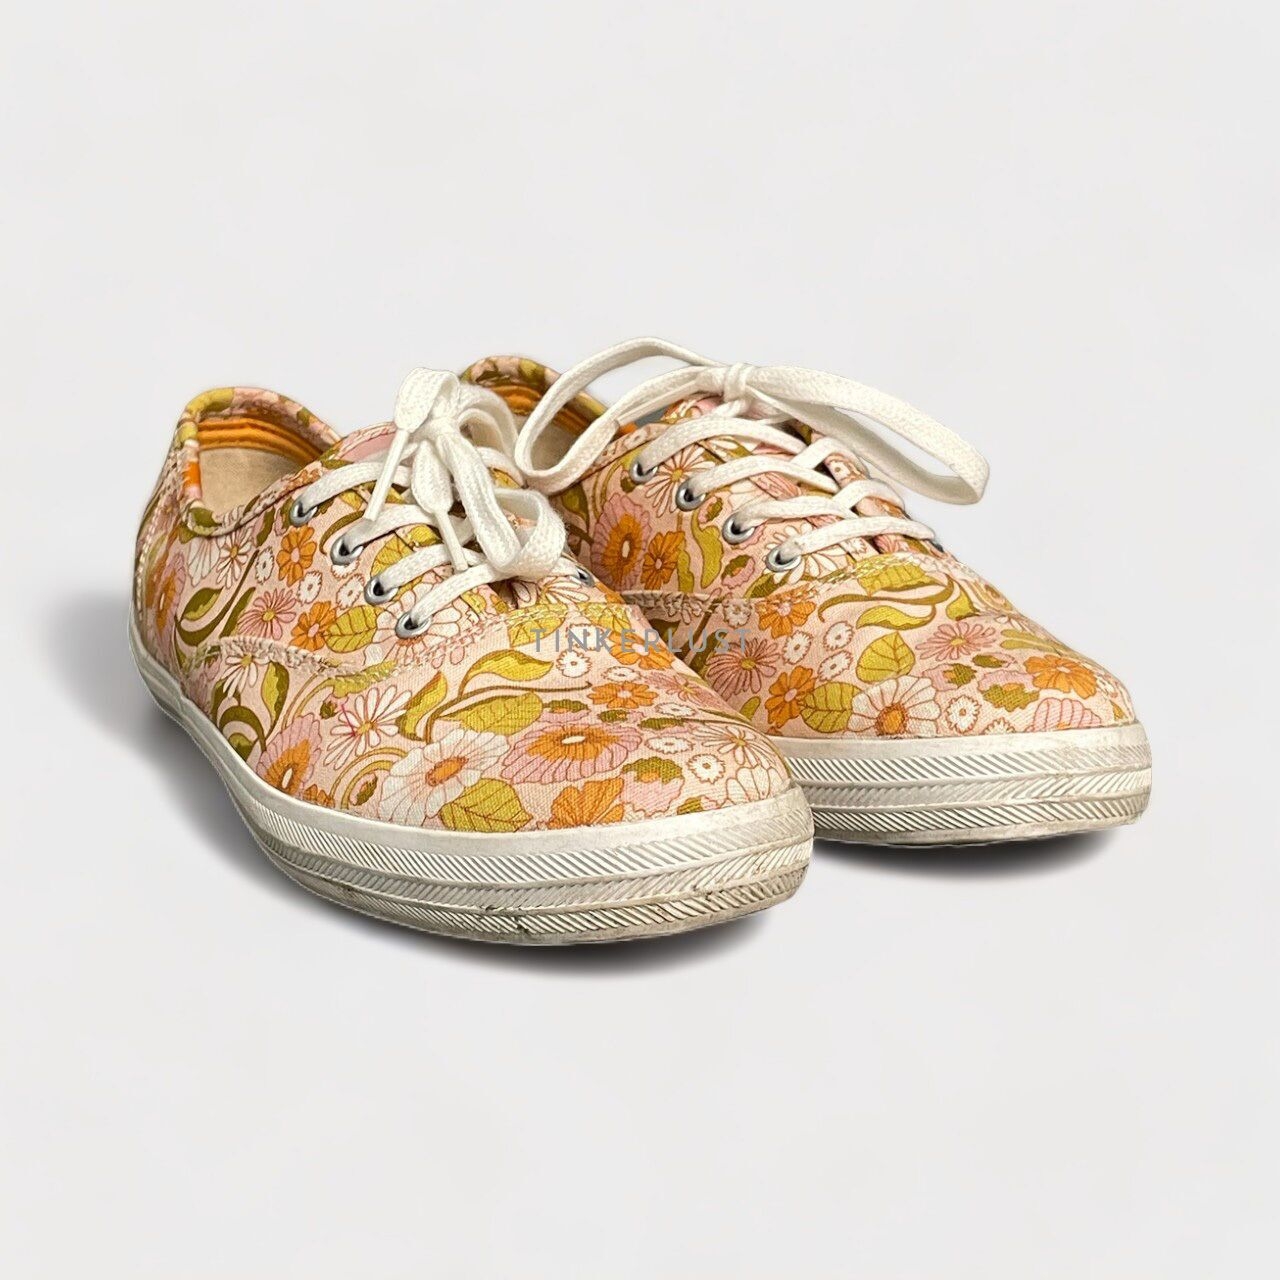 Keds Champion Organic Cotton Multi Floral Sneakers